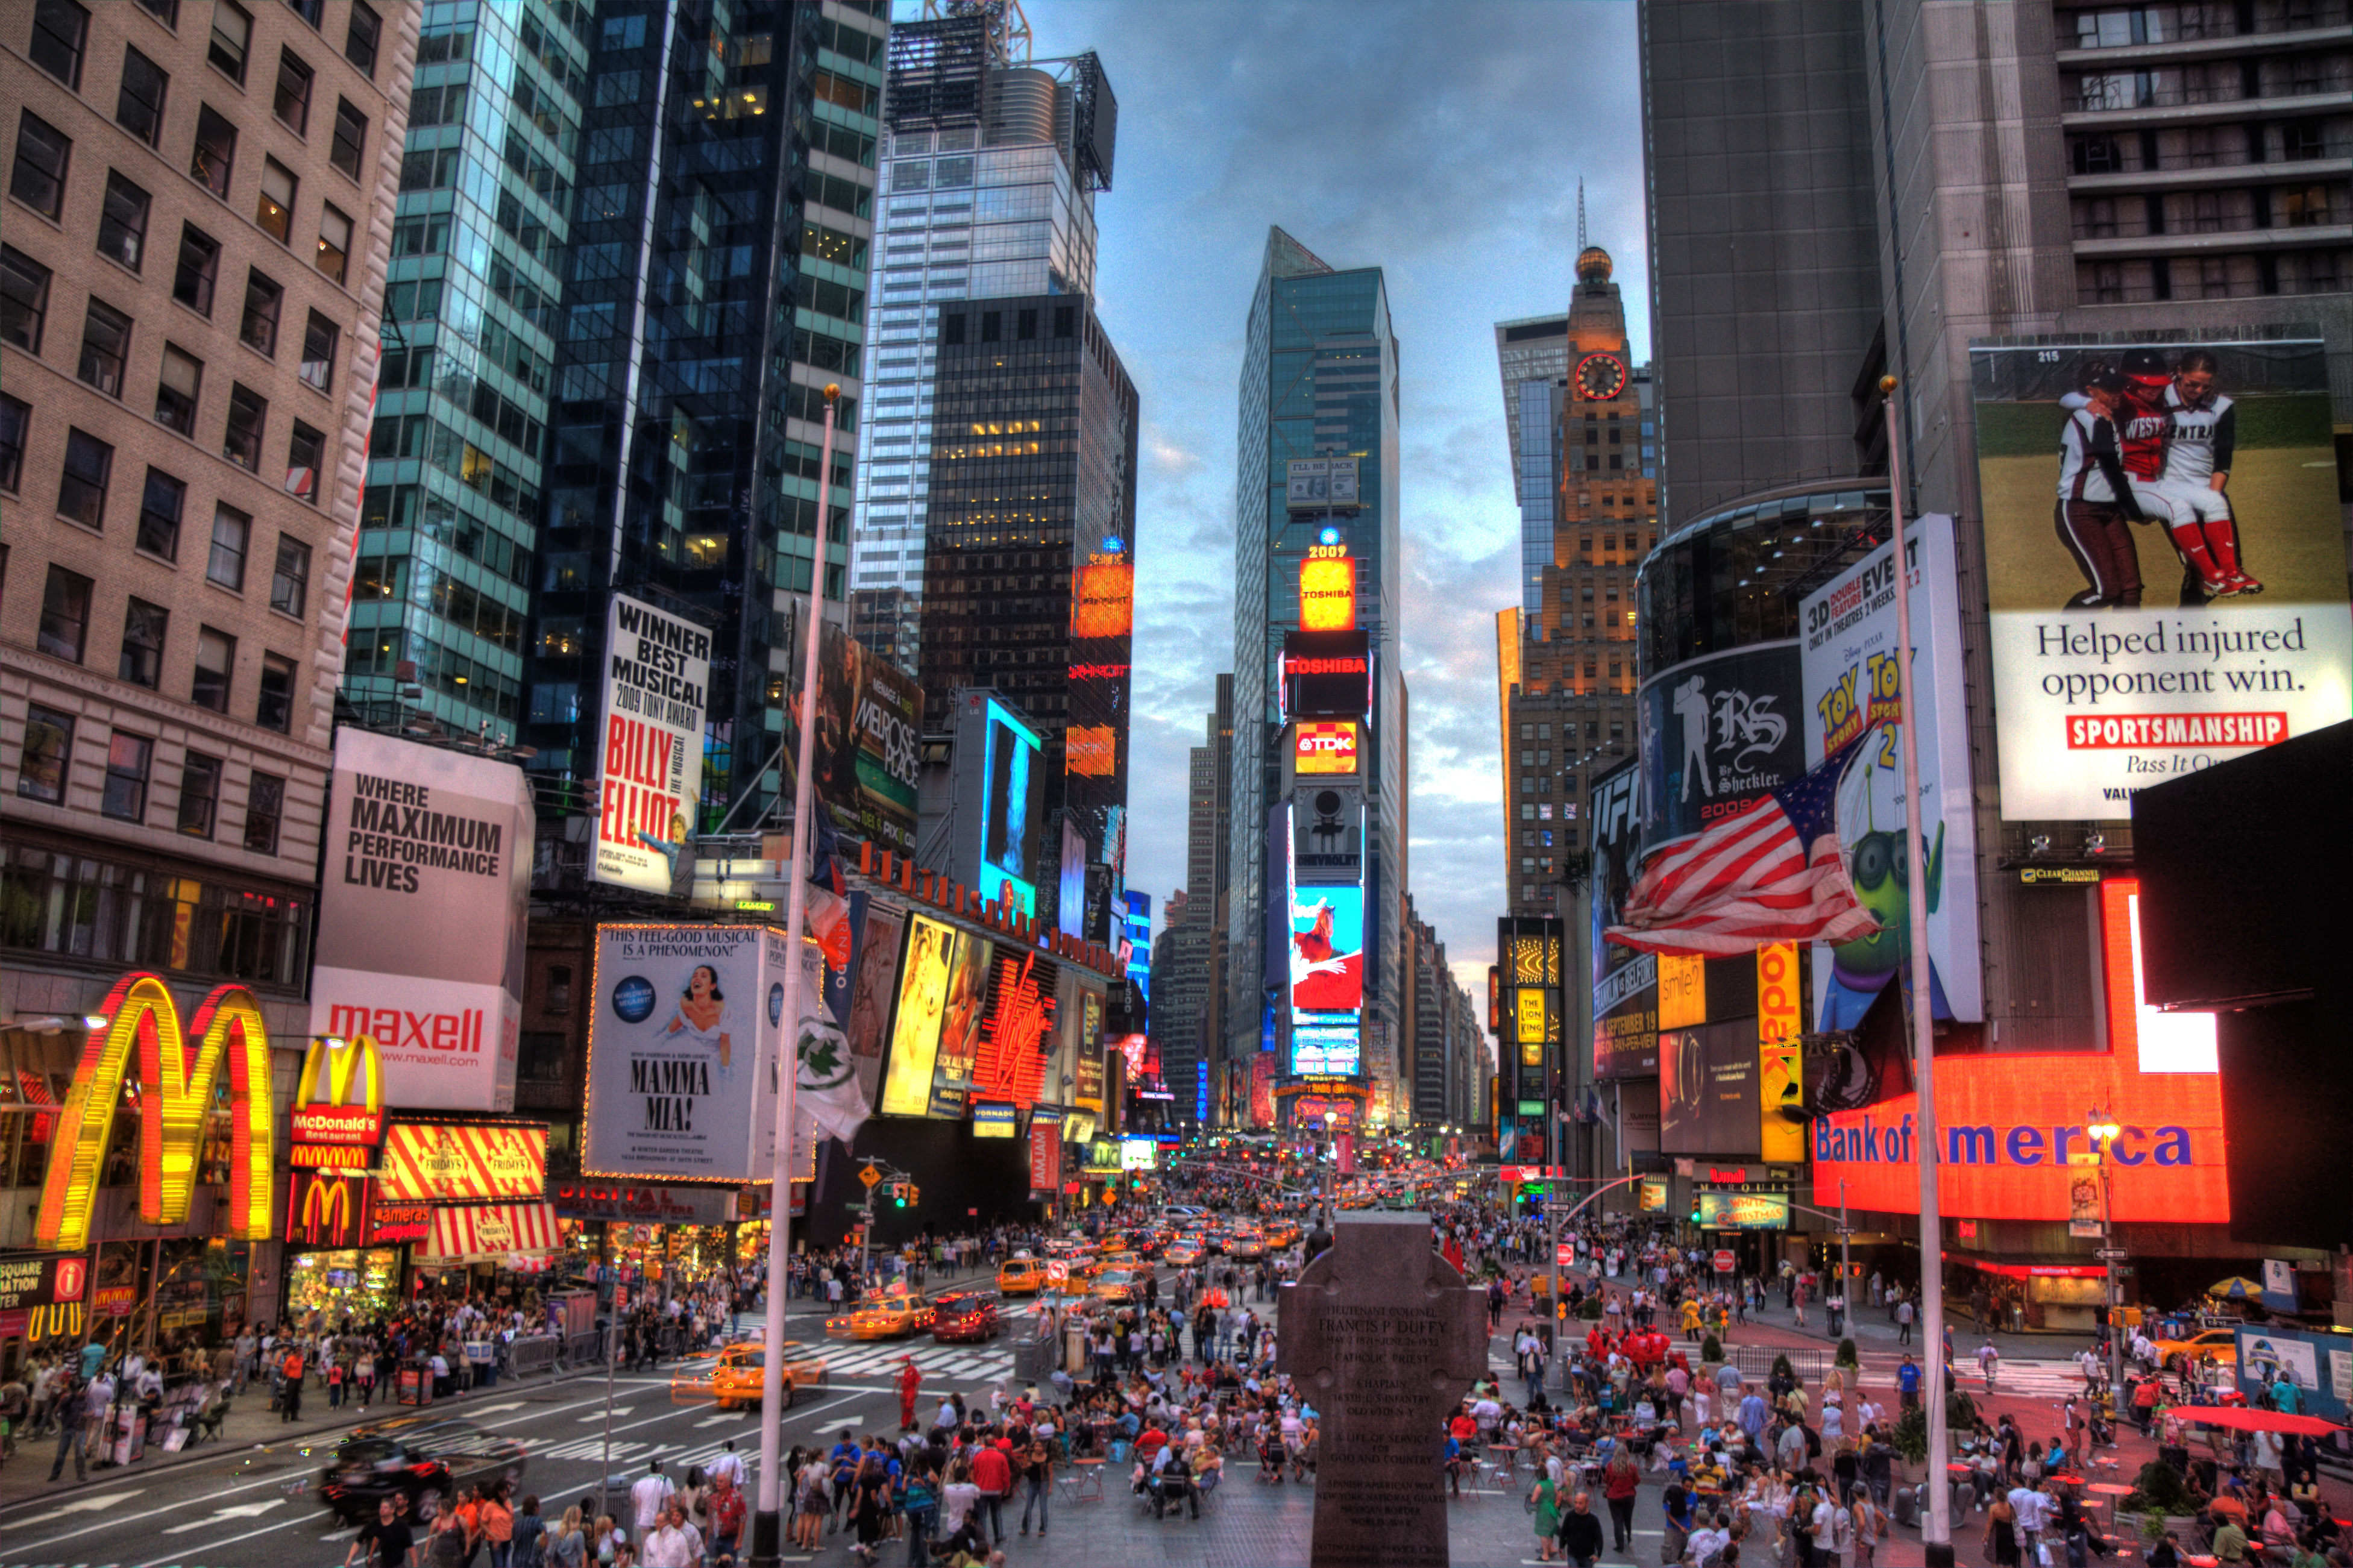 File:New york times square-terabass.jpg - Wikimedia Commons